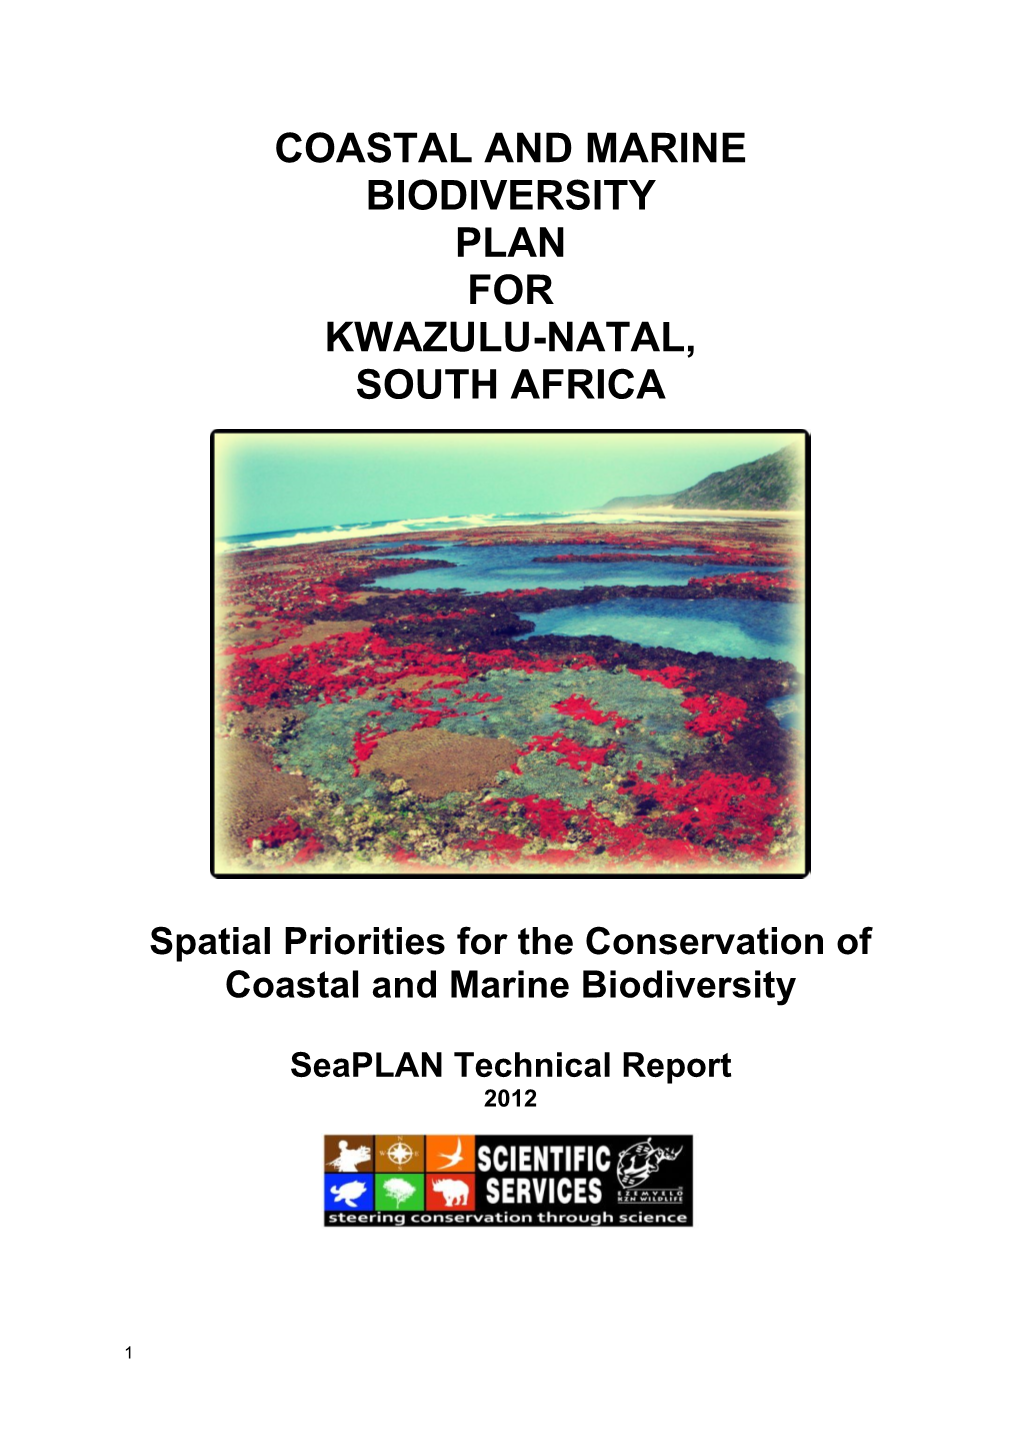 A Spatial Framework for the Conservation of Marine and Coastal Biodiversity in Kwazulu-Natal